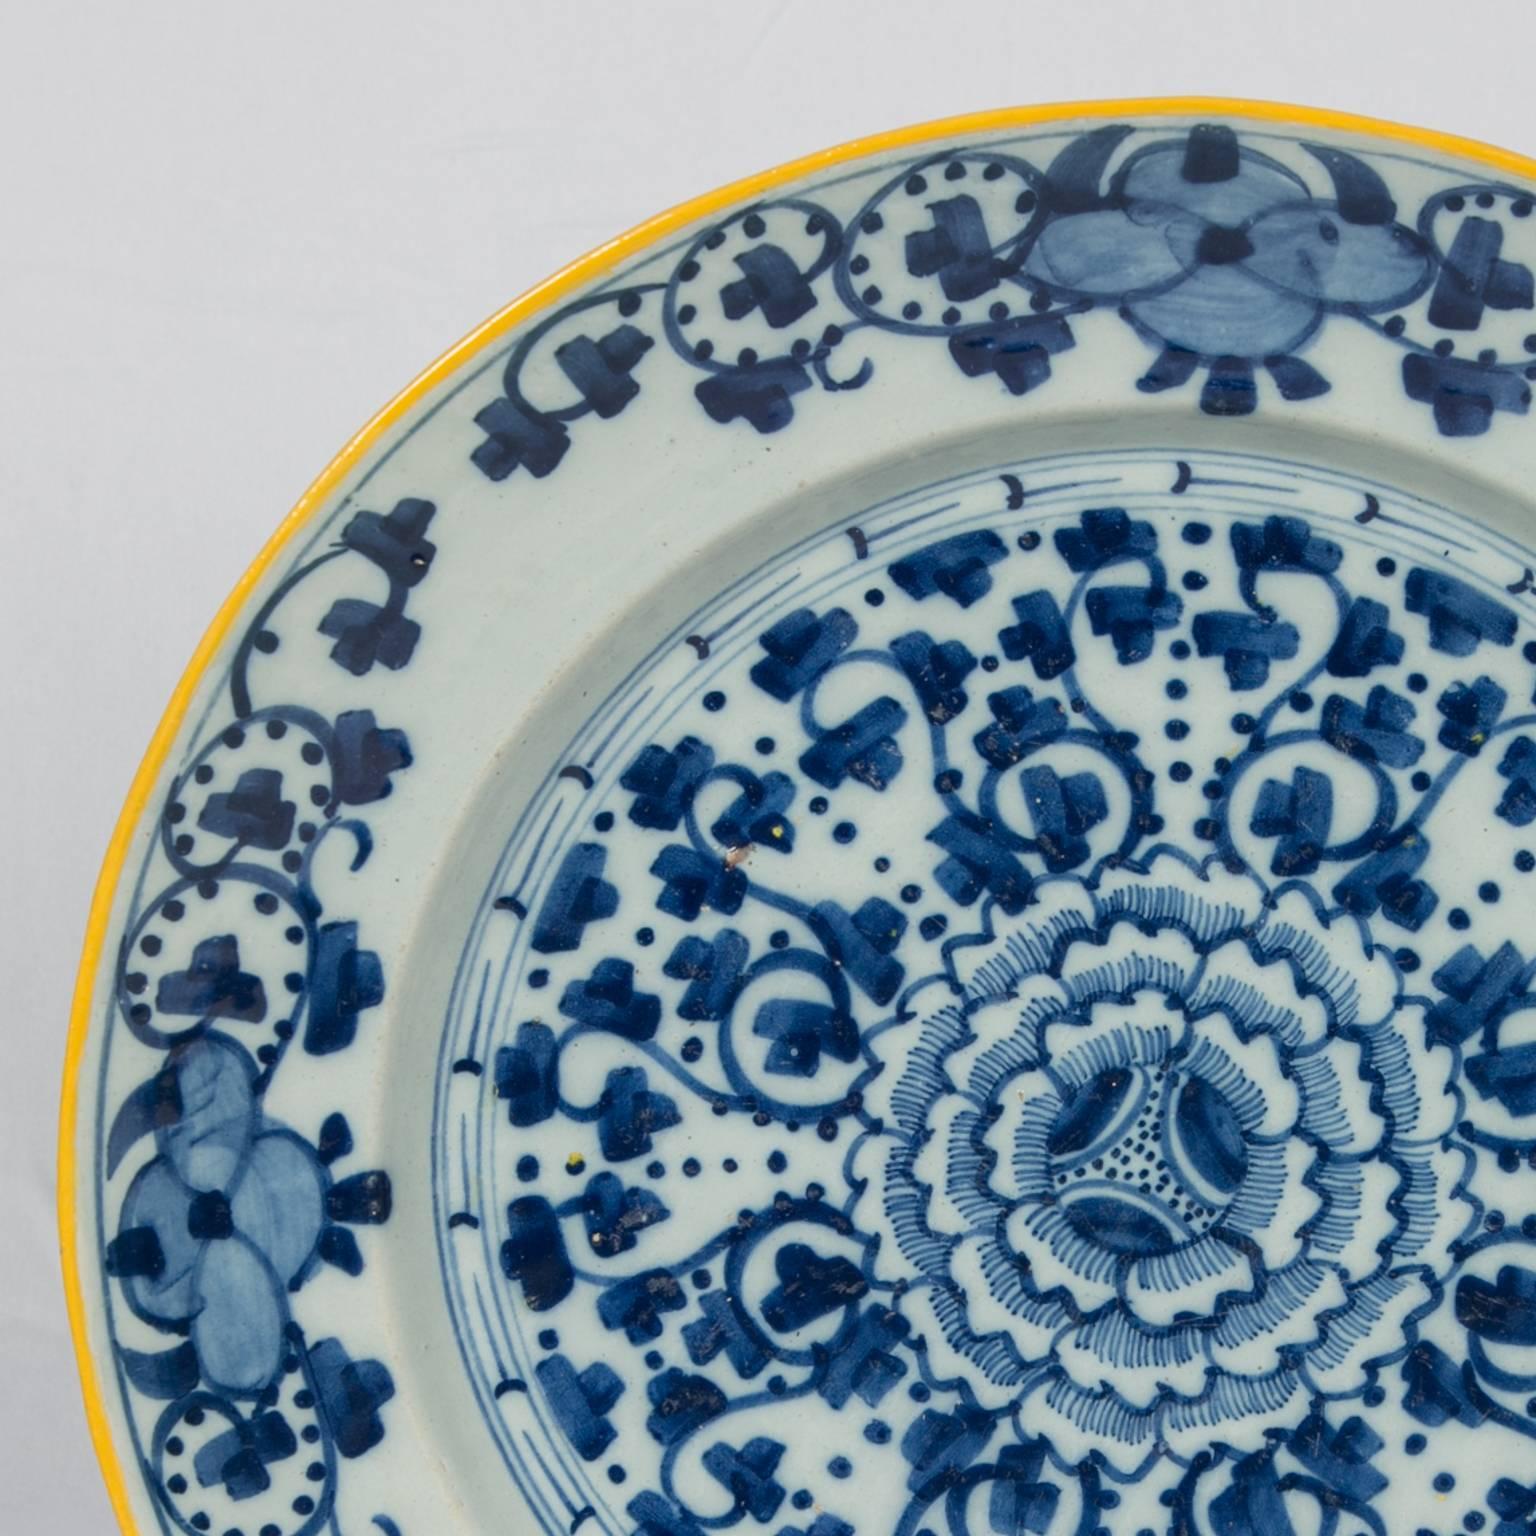 We are pleased to offer this exceptional blue and white Dutch Delft charger painted in bright cobalt blue with a large peony in the center. Scrolling vines and flower heads radiate from the peony in a crisp, geometric pattern. The charger has a